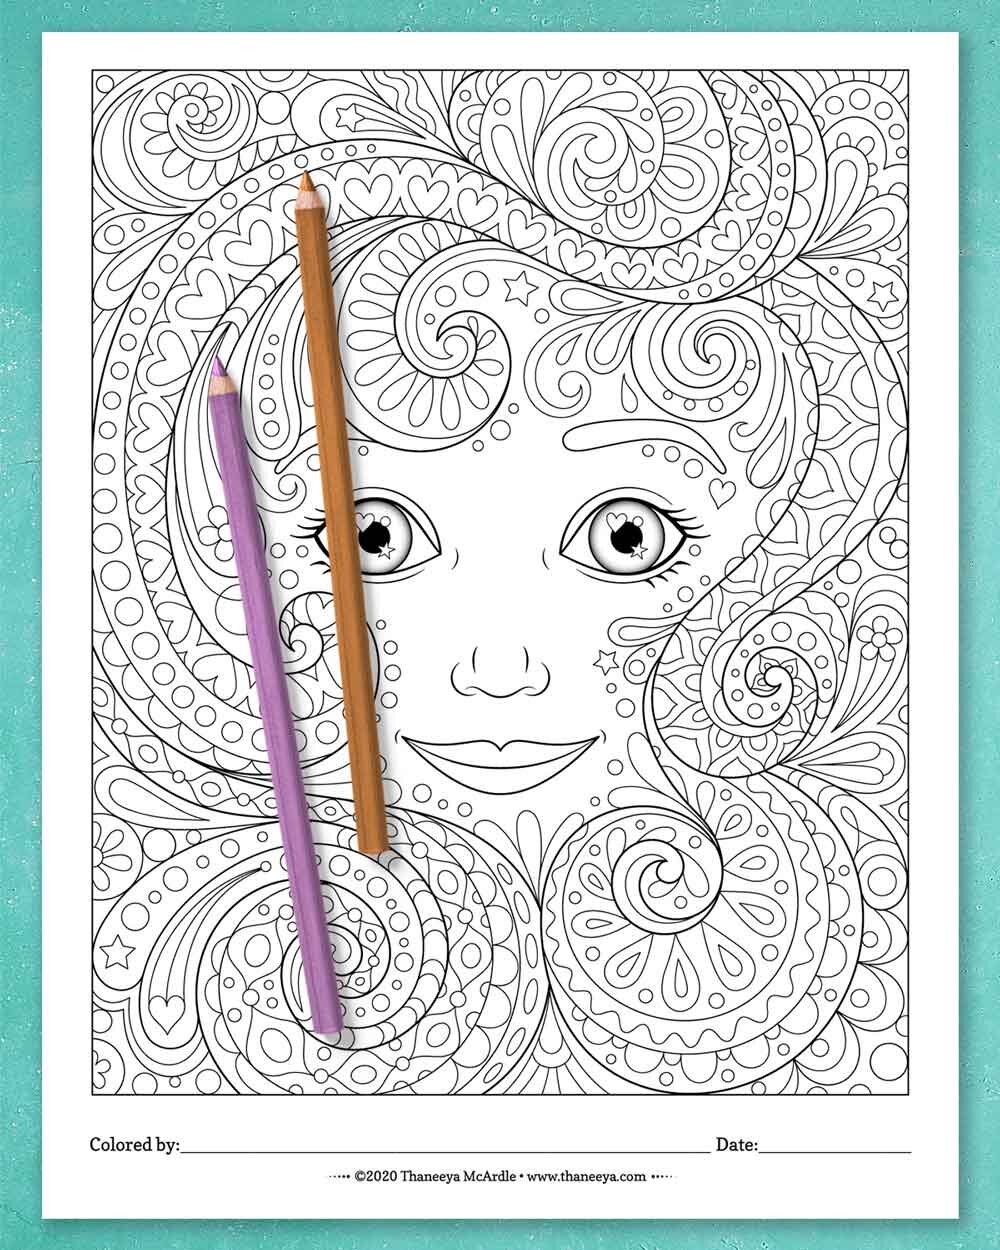 Enchanted Faces Coloring Pages by Thaneeya McArdle - Set of 10 printable coloring pages to download and color!